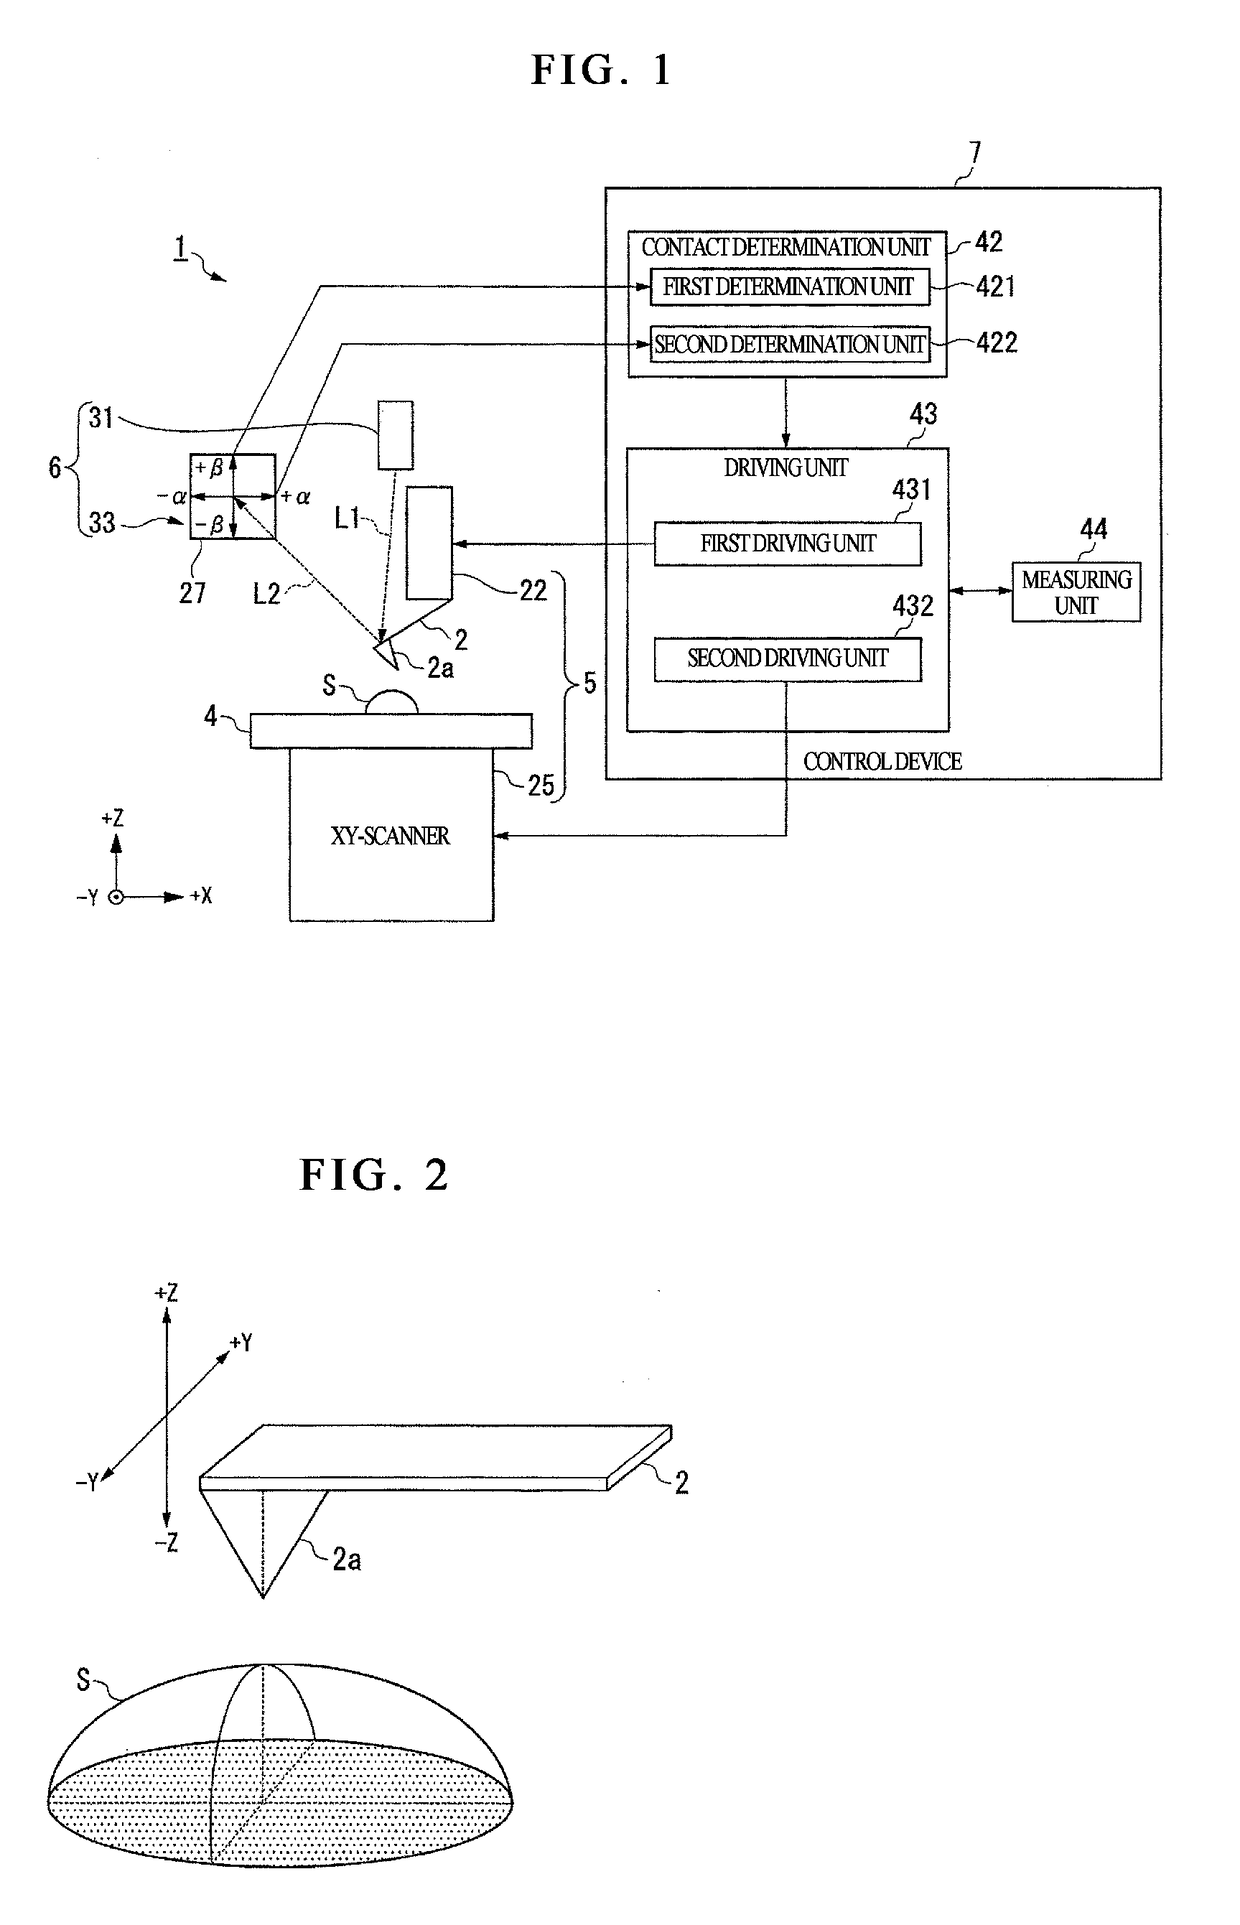 Scanning probe microscope and probe contact detection method